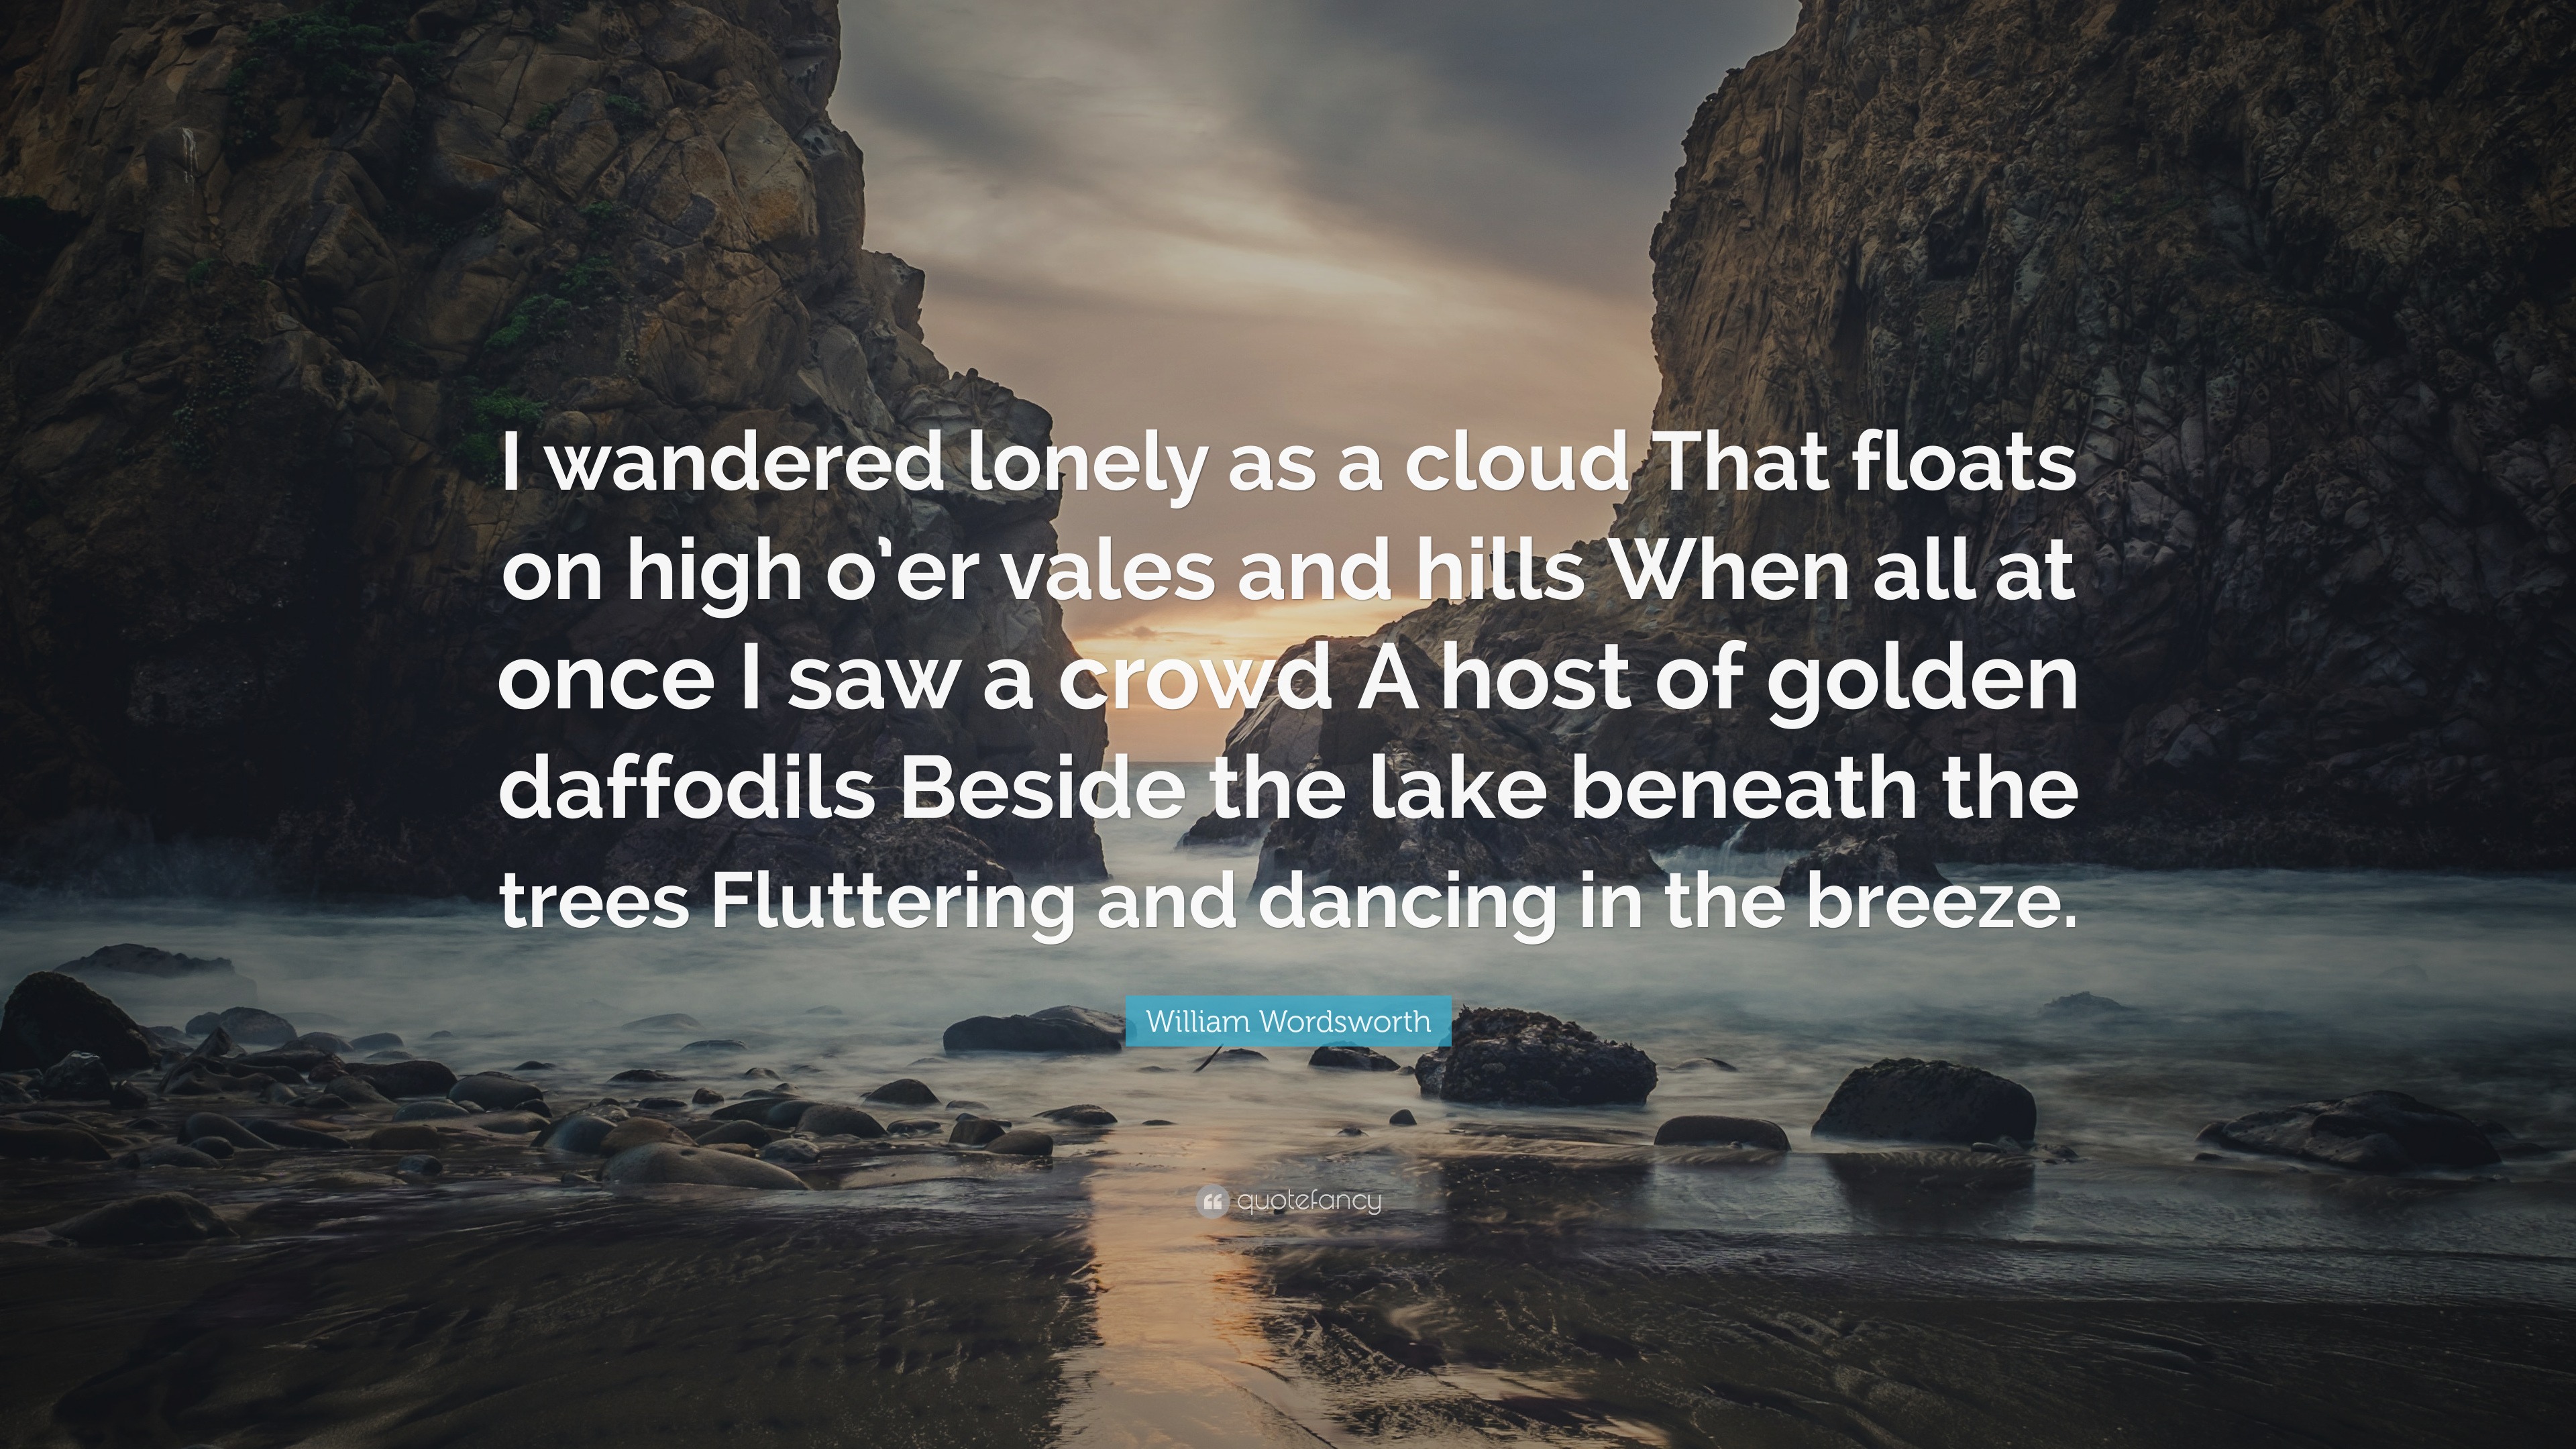 i wander lonely as a cloud by william wordsworth